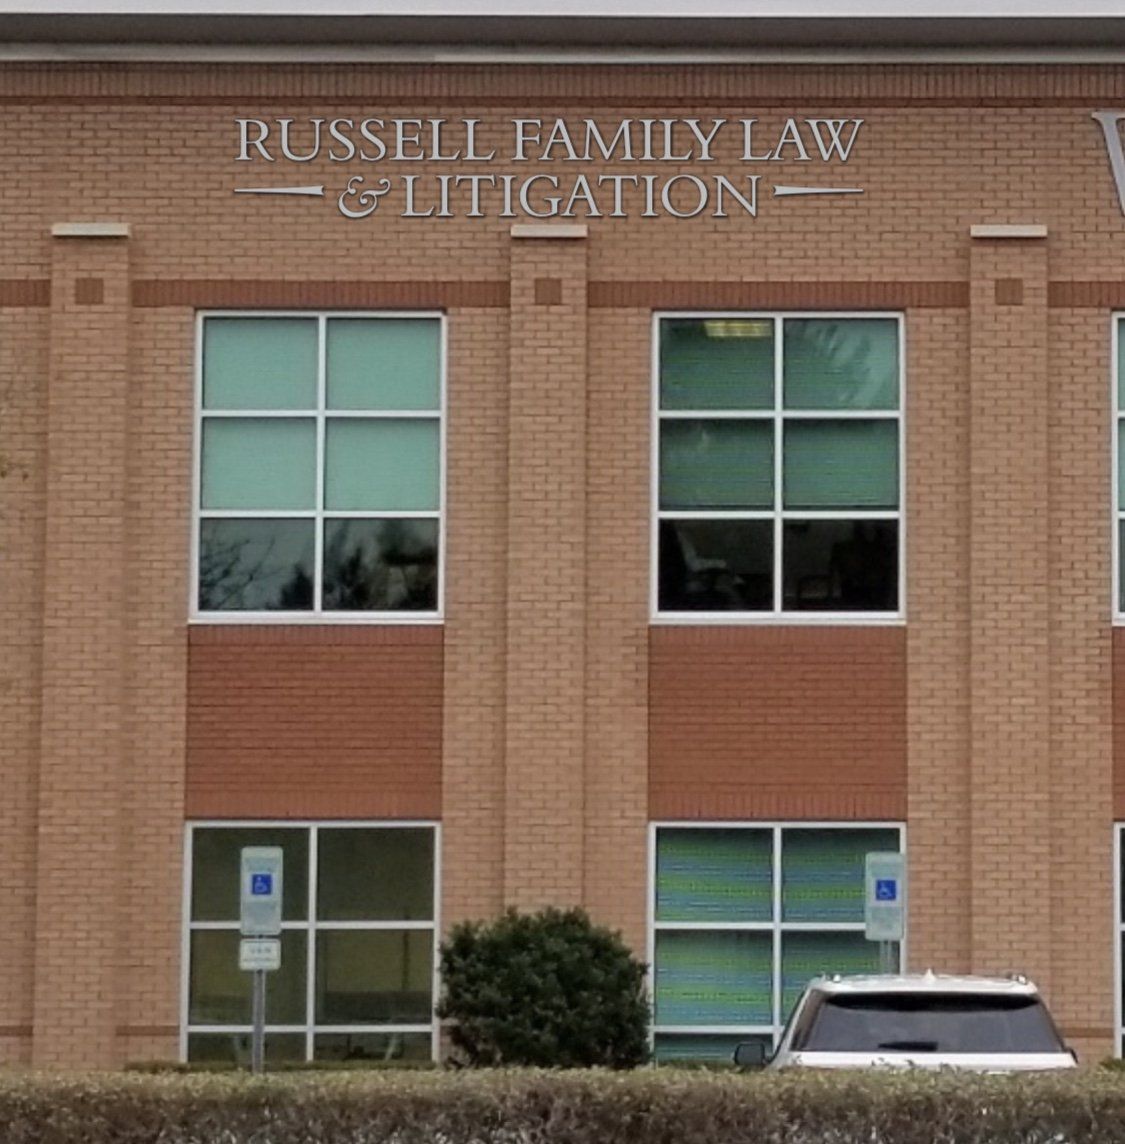 1015 Ashes Drive, suite 104 the front of Russell Family Law Office in Wilmington NC